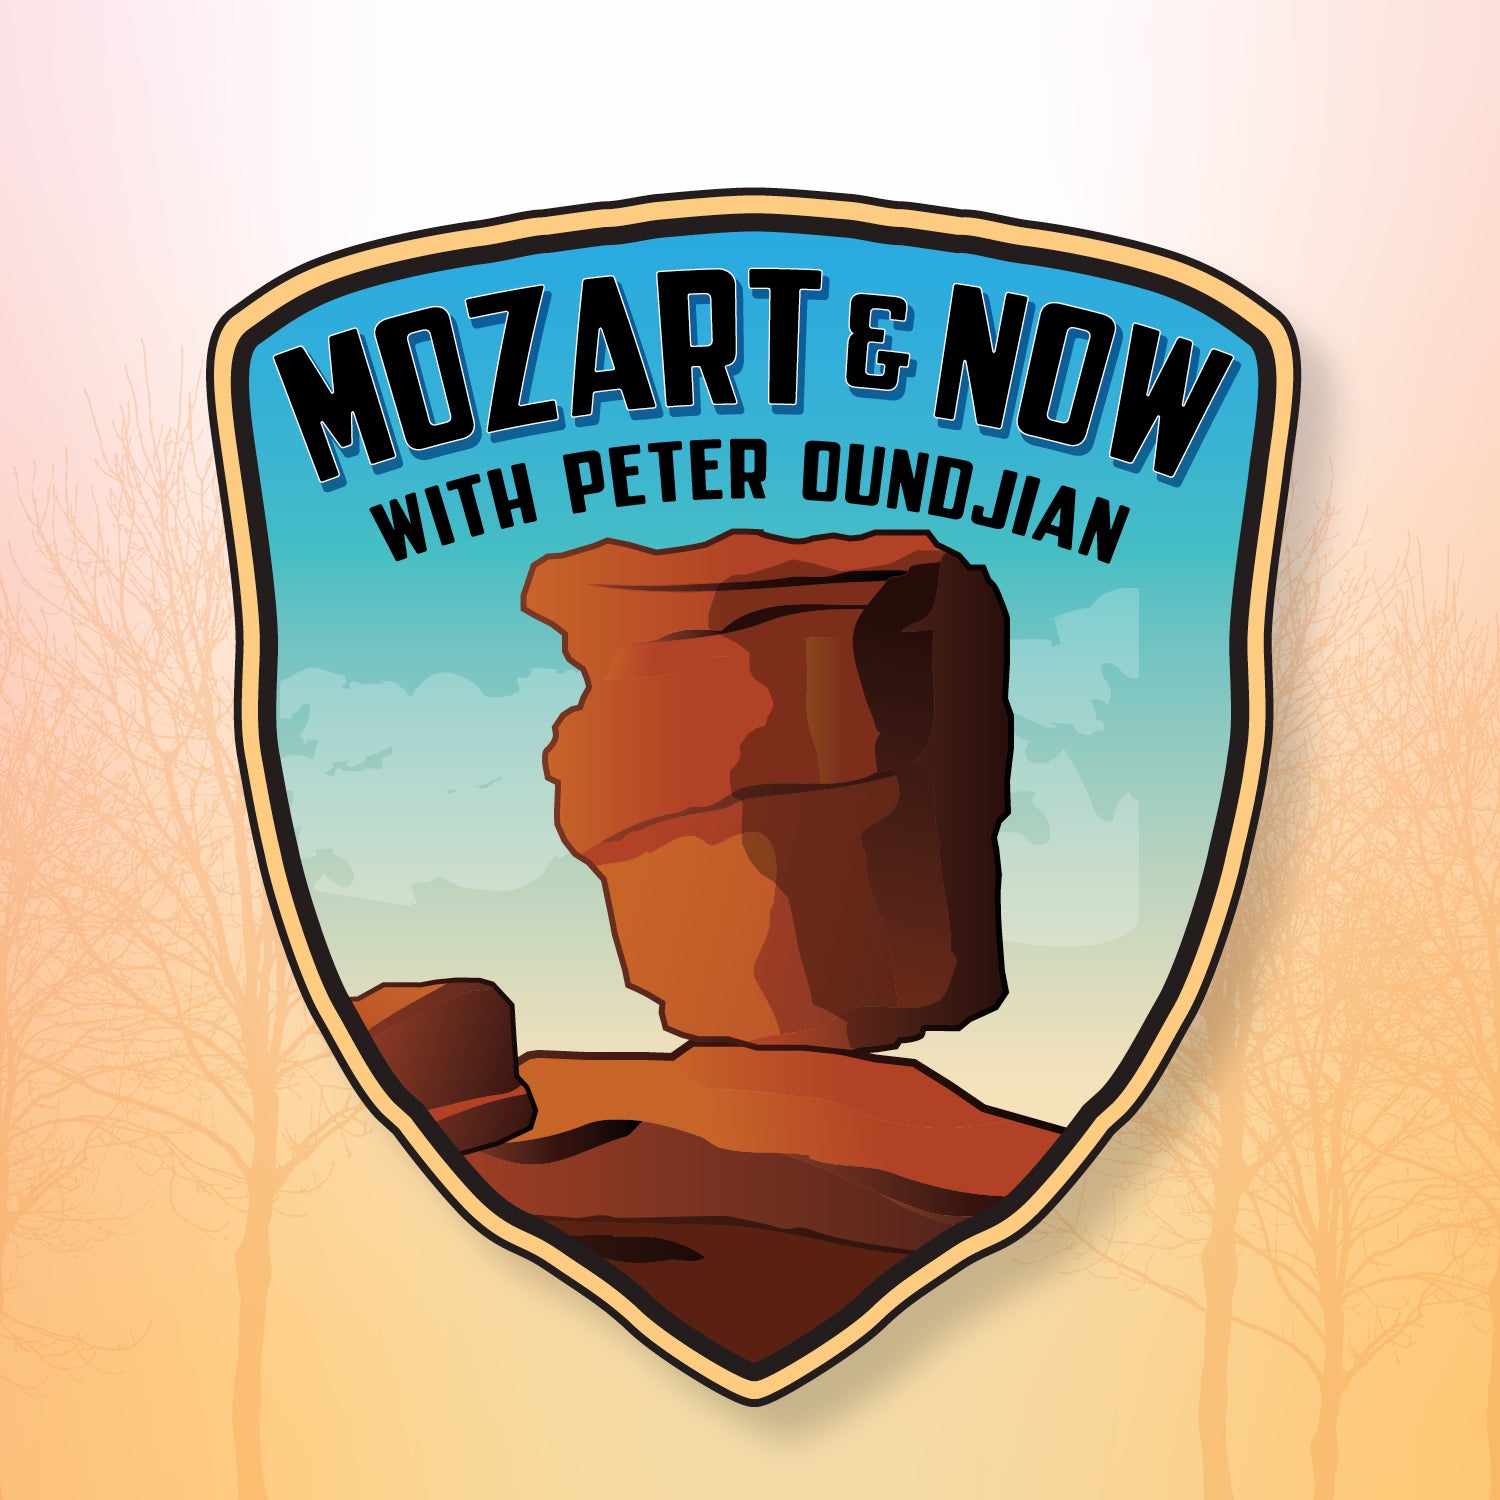 More Info for Mozart & Now with Peter Oundjian